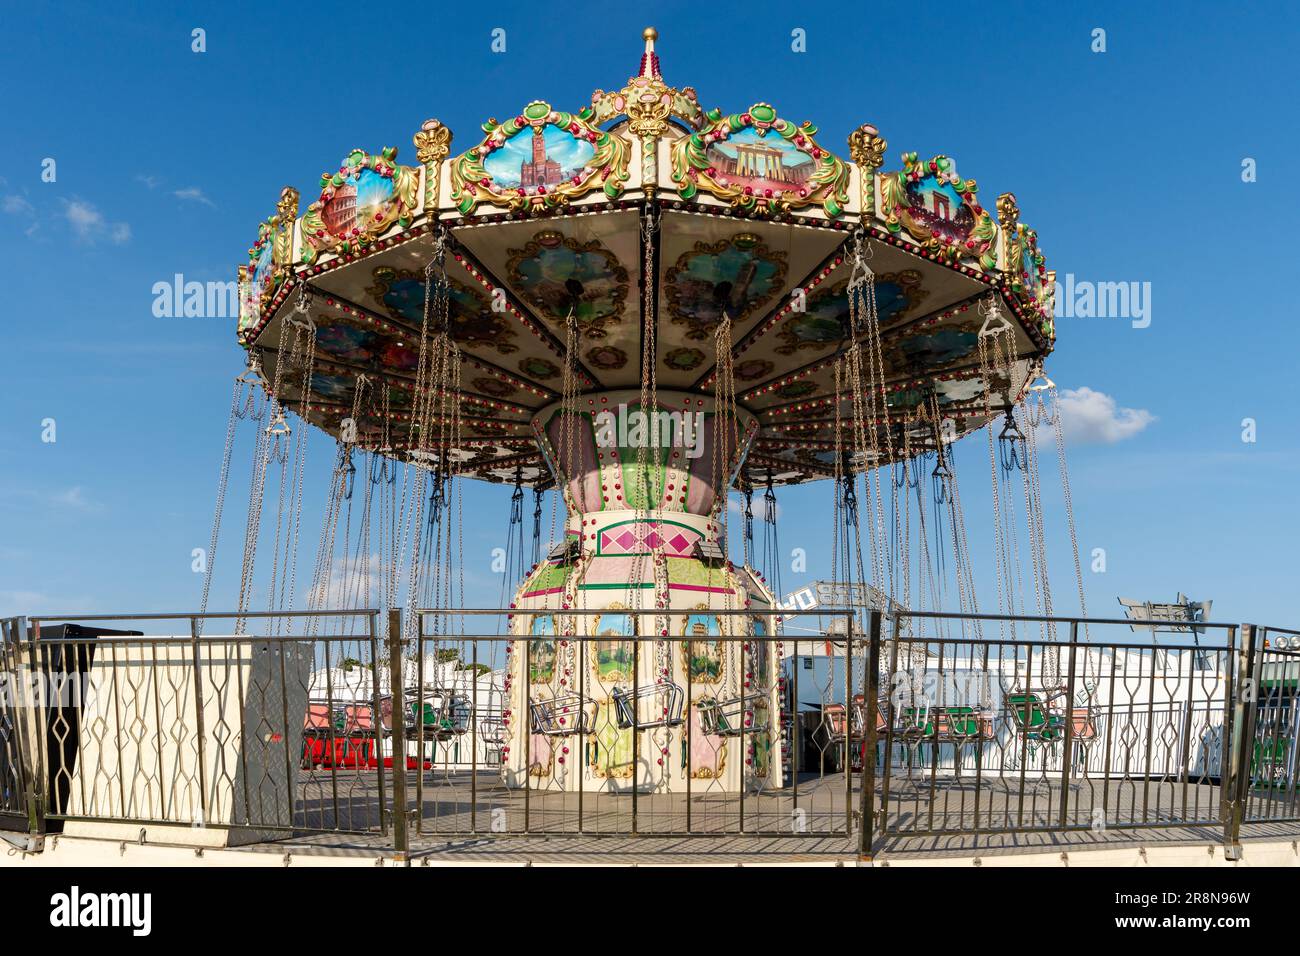 A traditional funfair ride carousel at The Hoppings summer fairground or showground in Newcastle upon Tyne, UK. Stock Photo